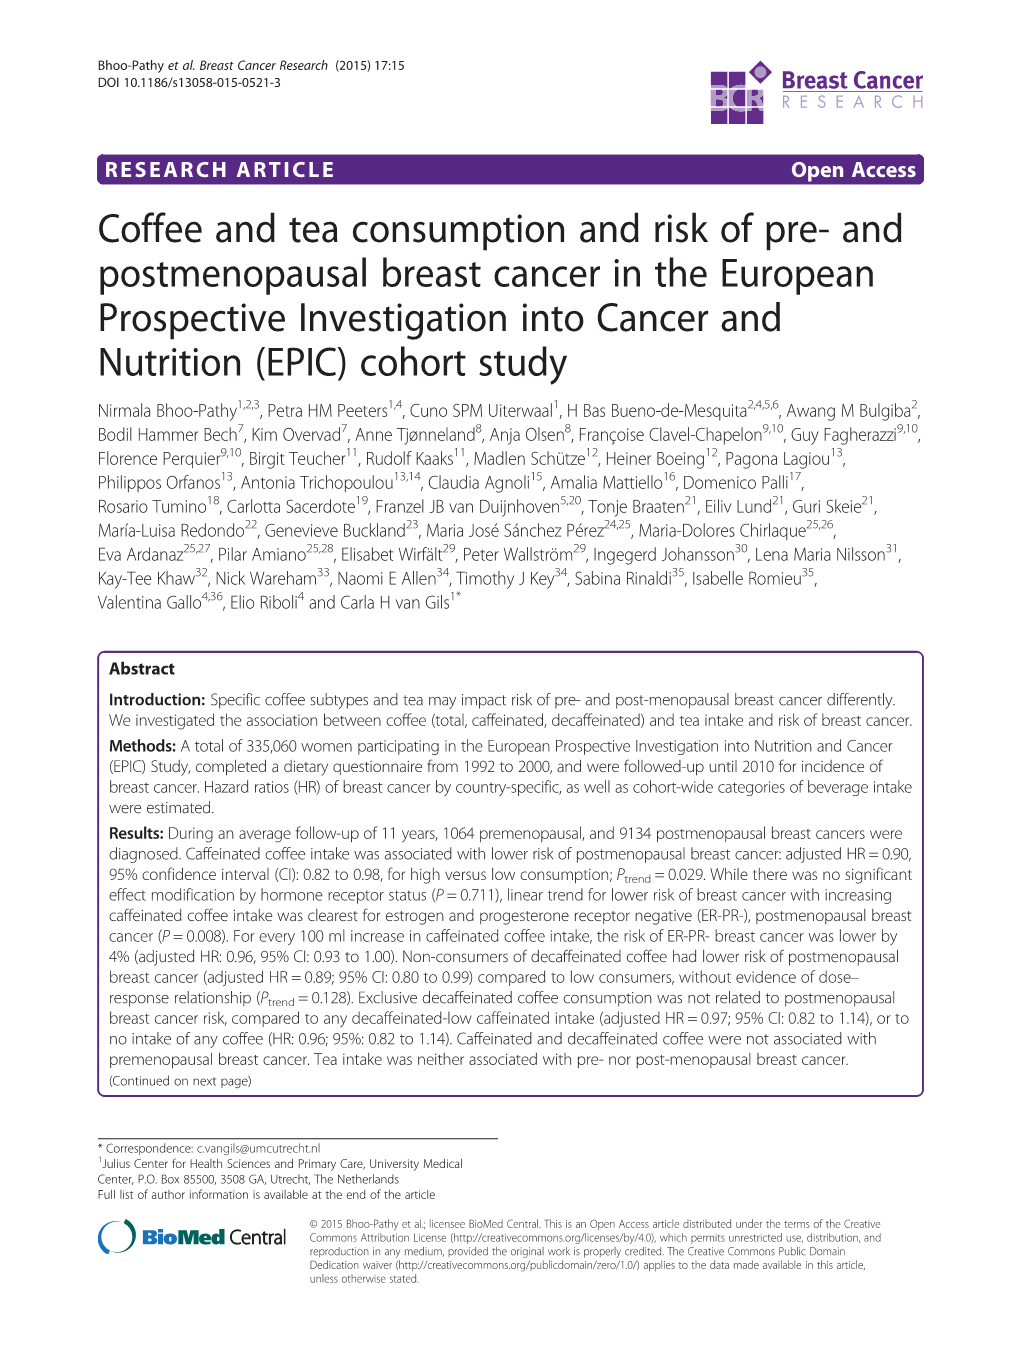 Coffee and Tea Consumption and Risk of Pre- and Postmenopausal Breast